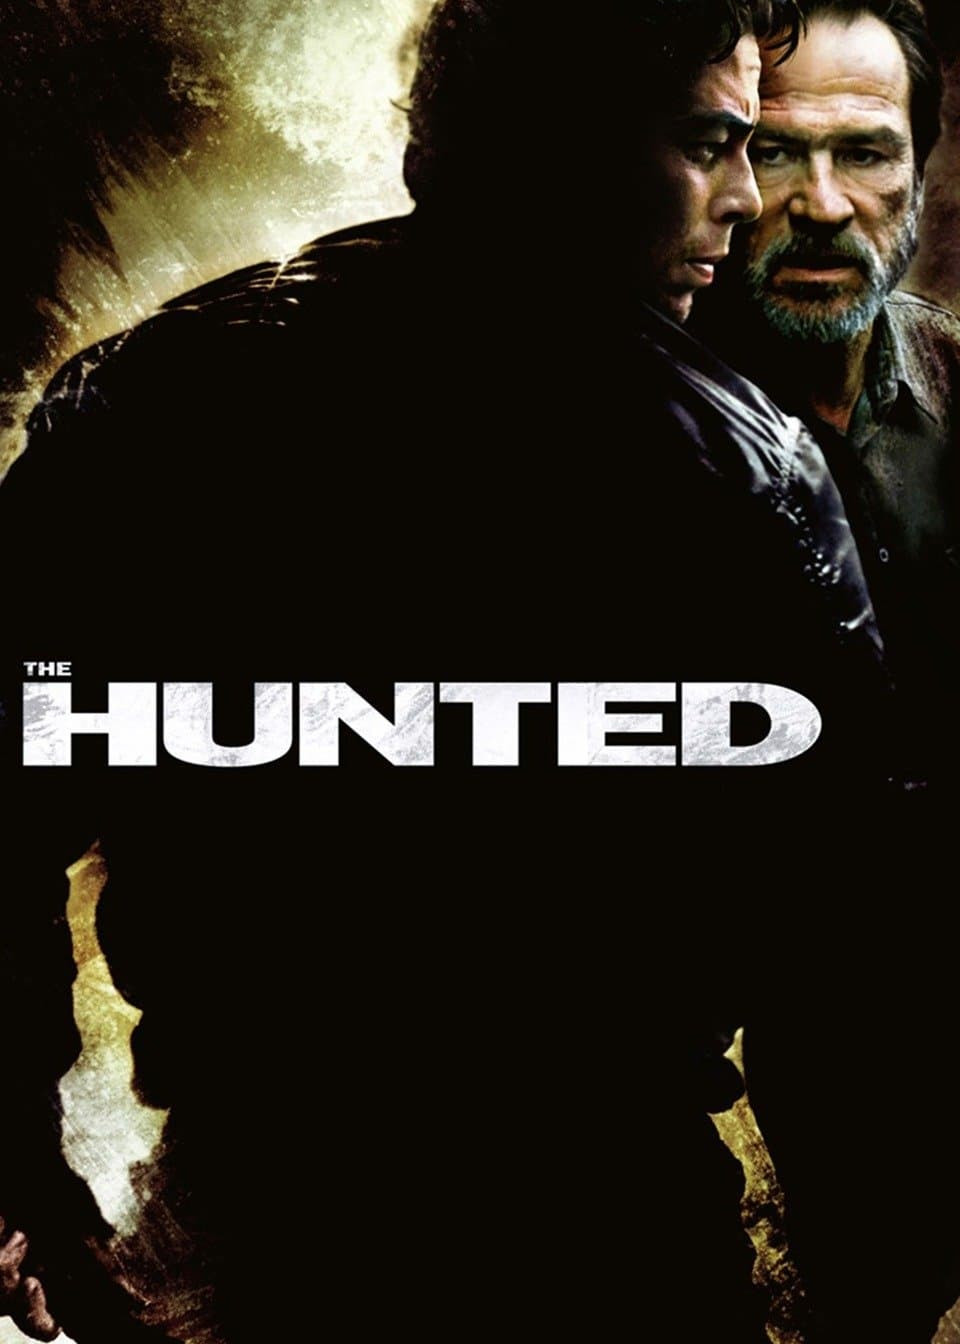 The Hunted (The Hunted) [2003]